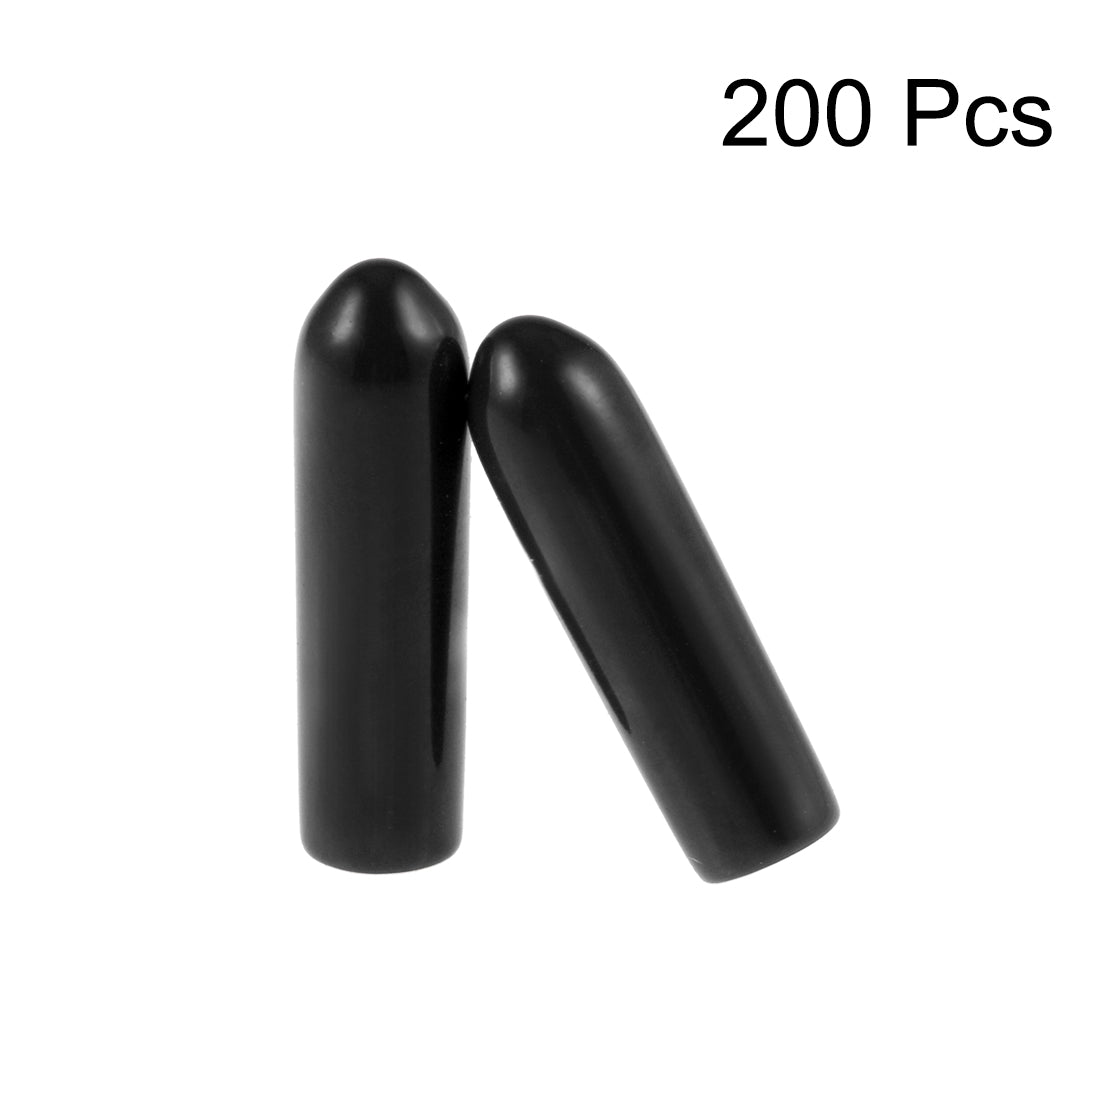 uxcell Uxcell 200pcs Rubber End Caps 3mm ID 15mm Height Screw Thread Protectors Black